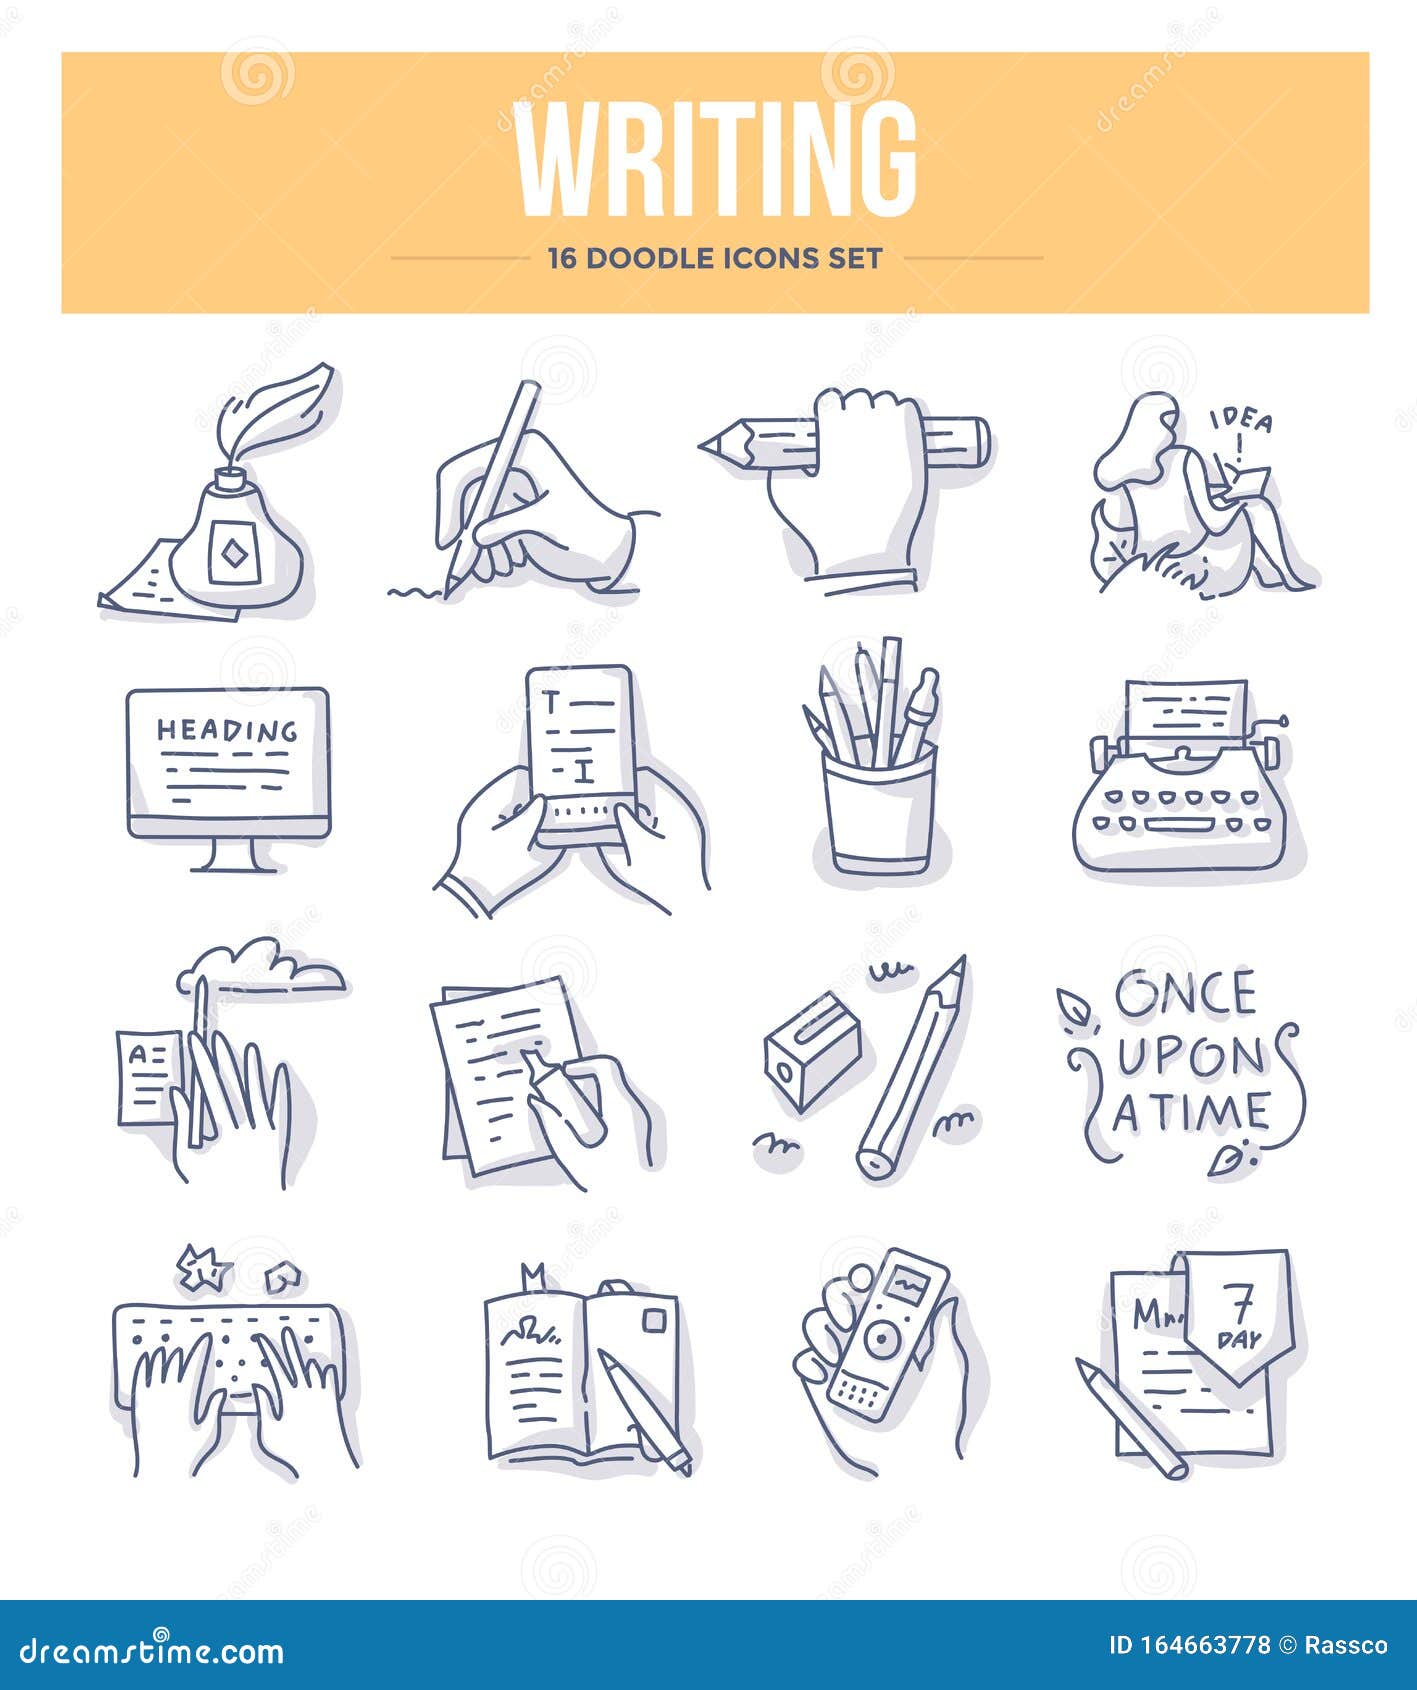 writing doodle icons